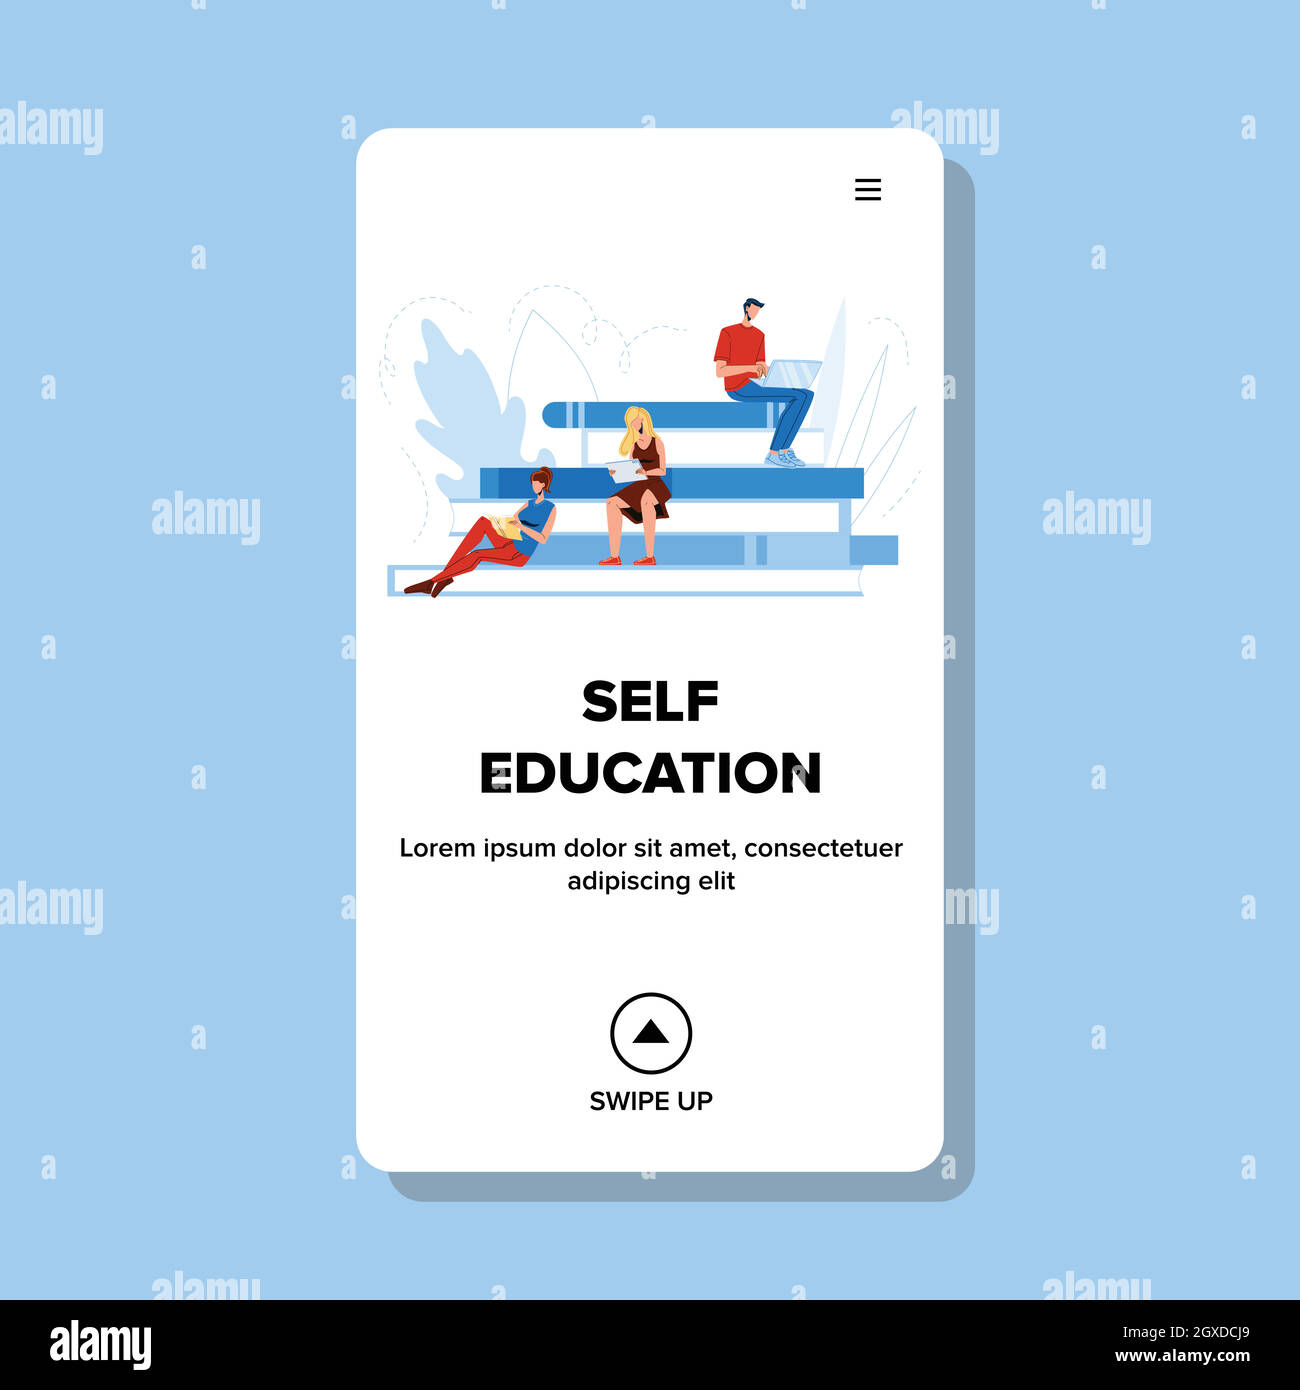 Self Education People Distance Learning Vector Stock Vector